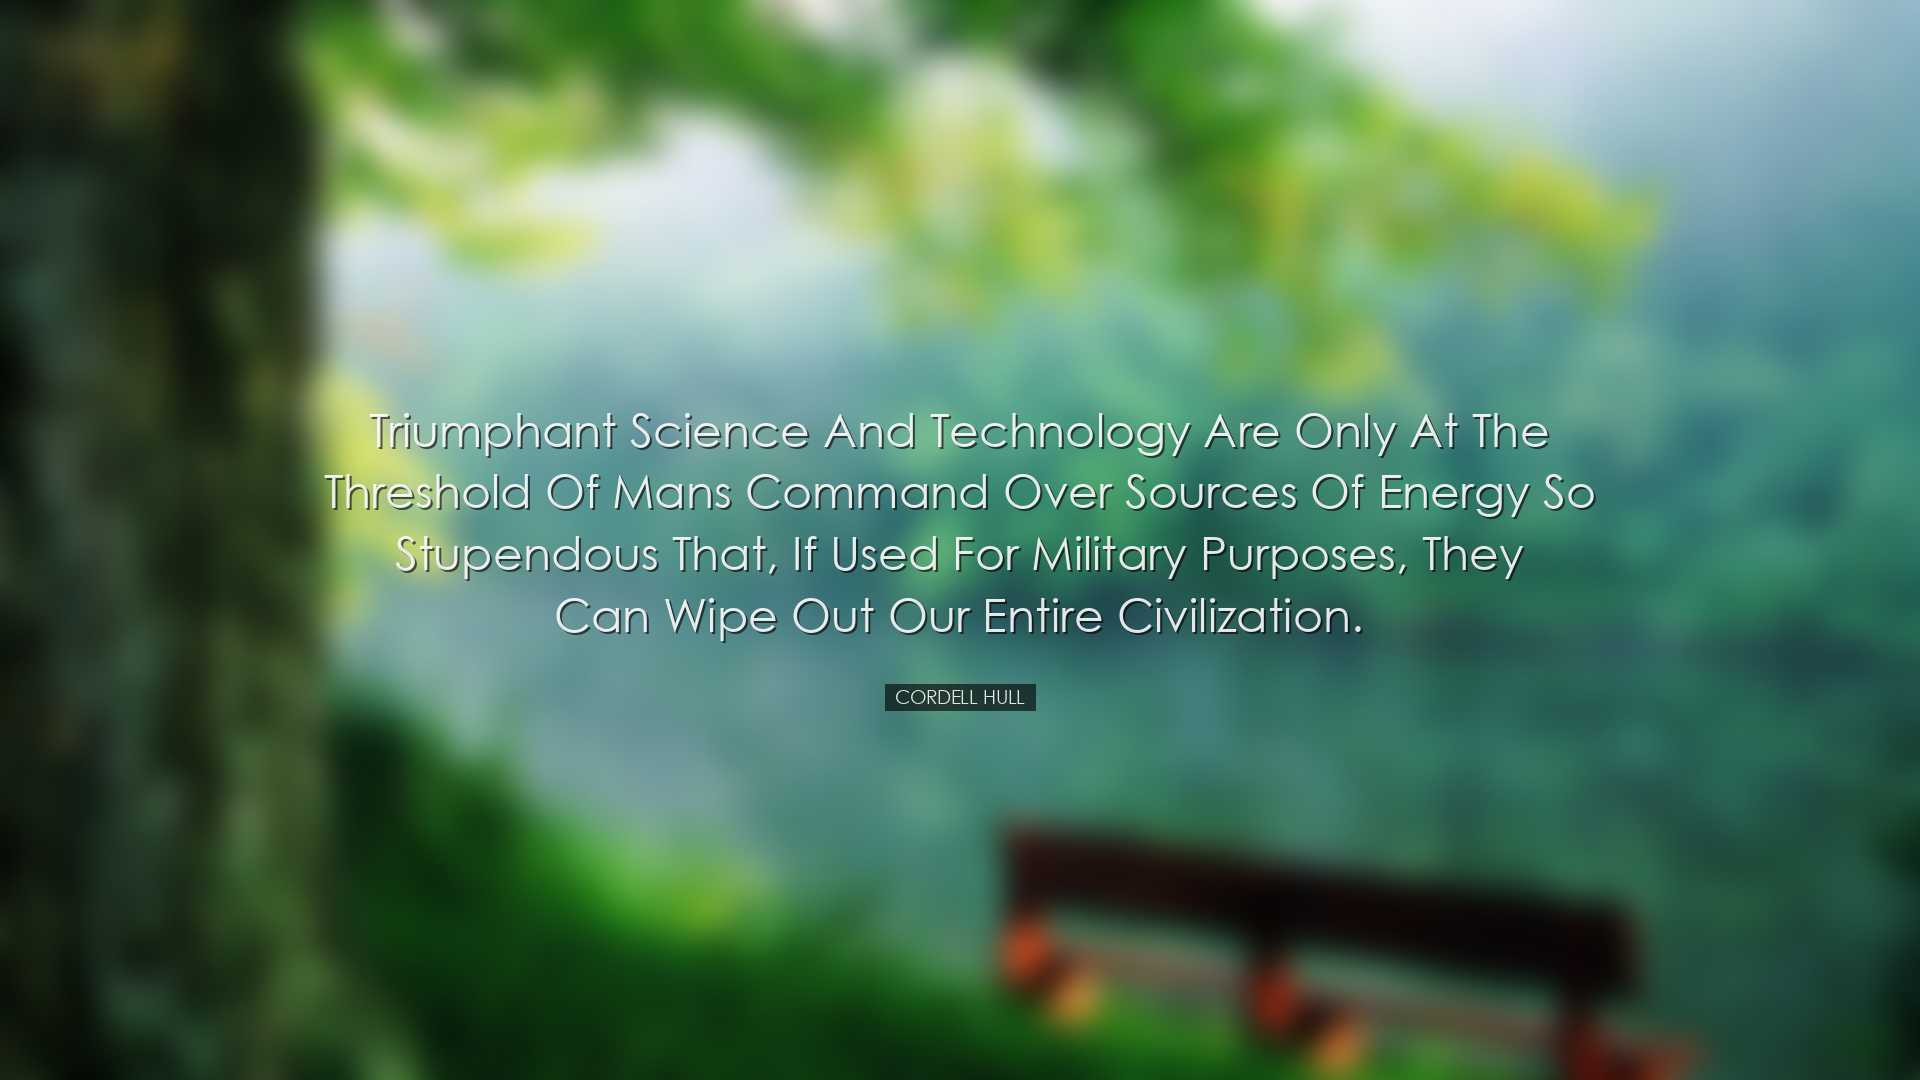 Triumphant science and technology are only at the threshold of man